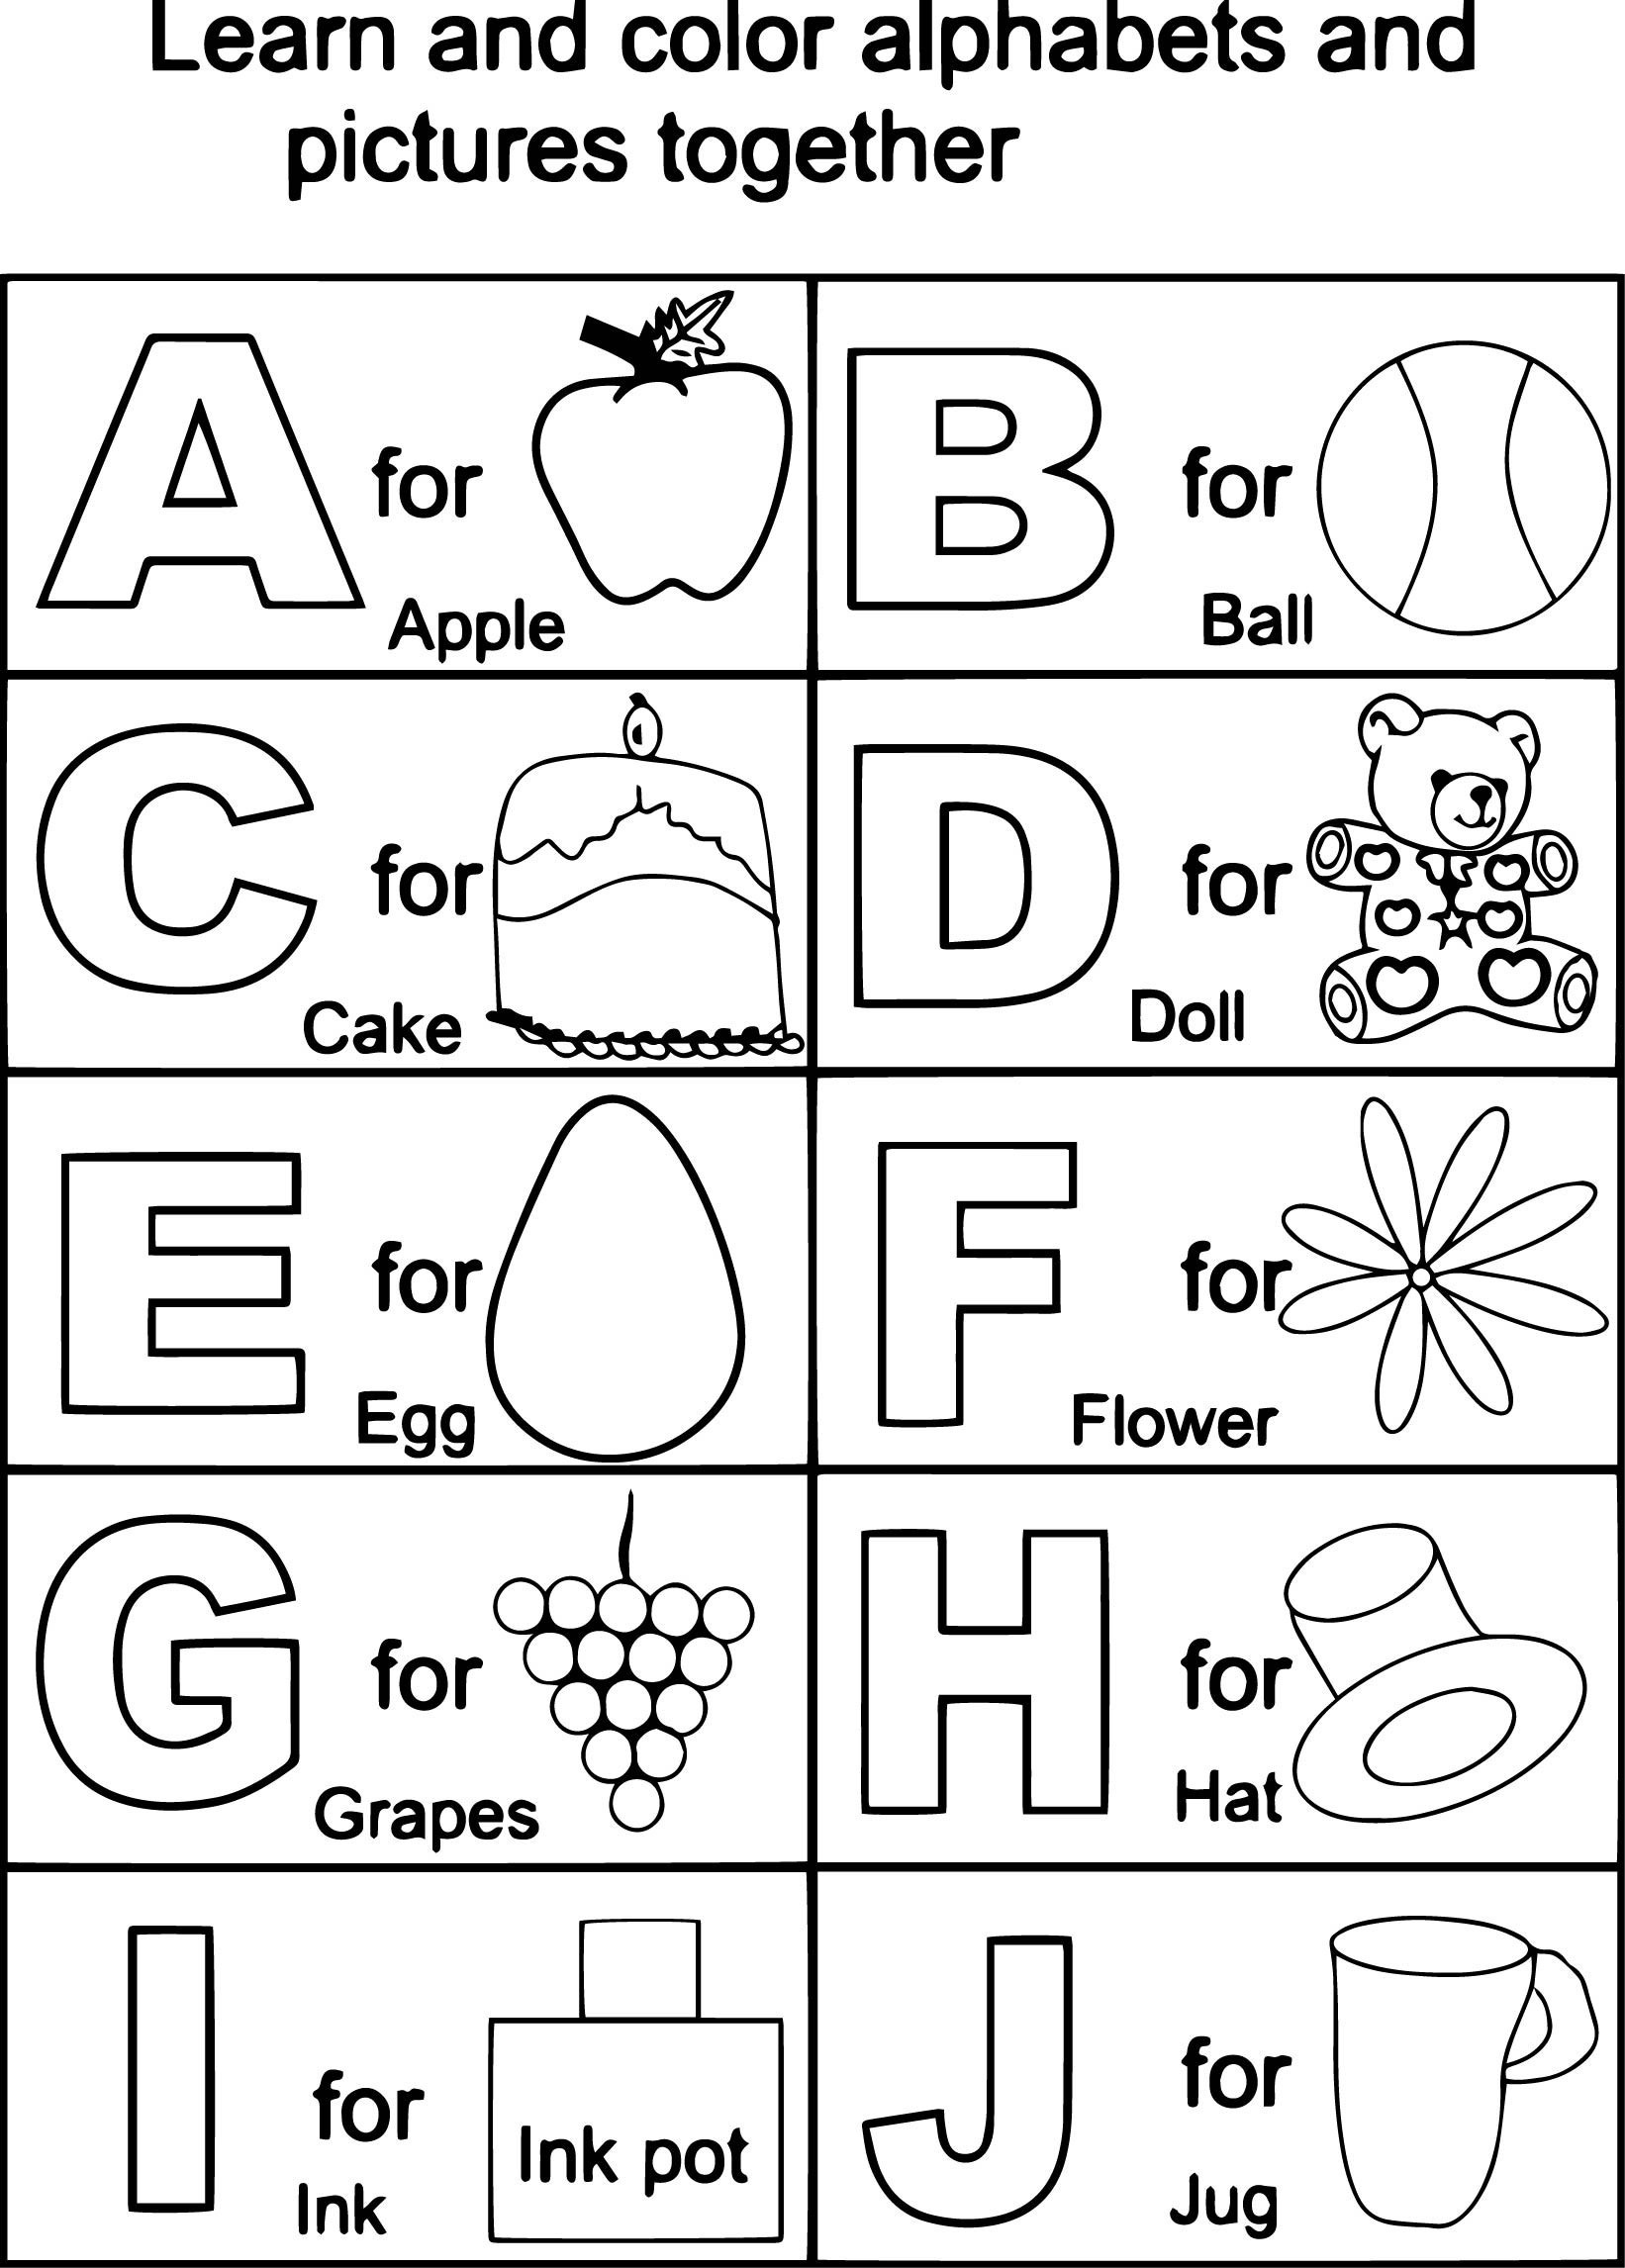 Lovely Free Alphabet Coloring Pages | Coloring Pages - Free Printable Alphabet Coloring Pages